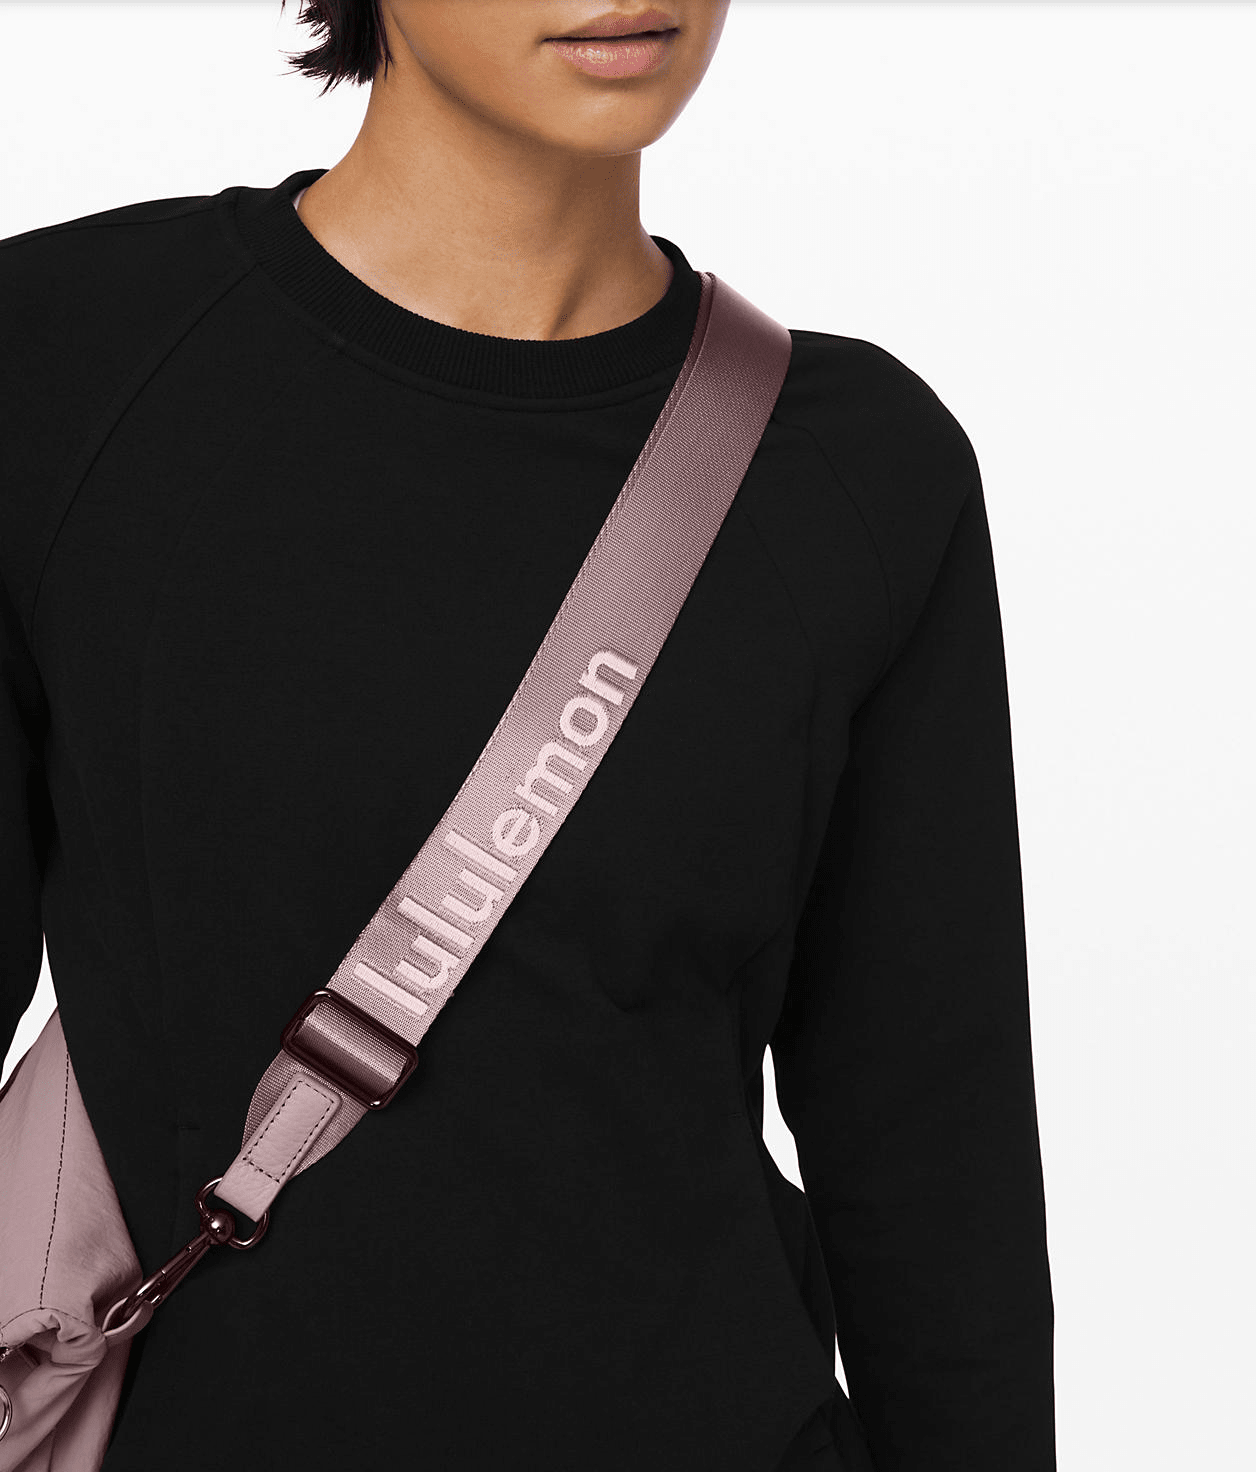 Does anyone have experience with aftermarket straps? I think I want to get  one for my Ellipse MM so I can wear it over my shoulder or as a crossbody.  The bag's